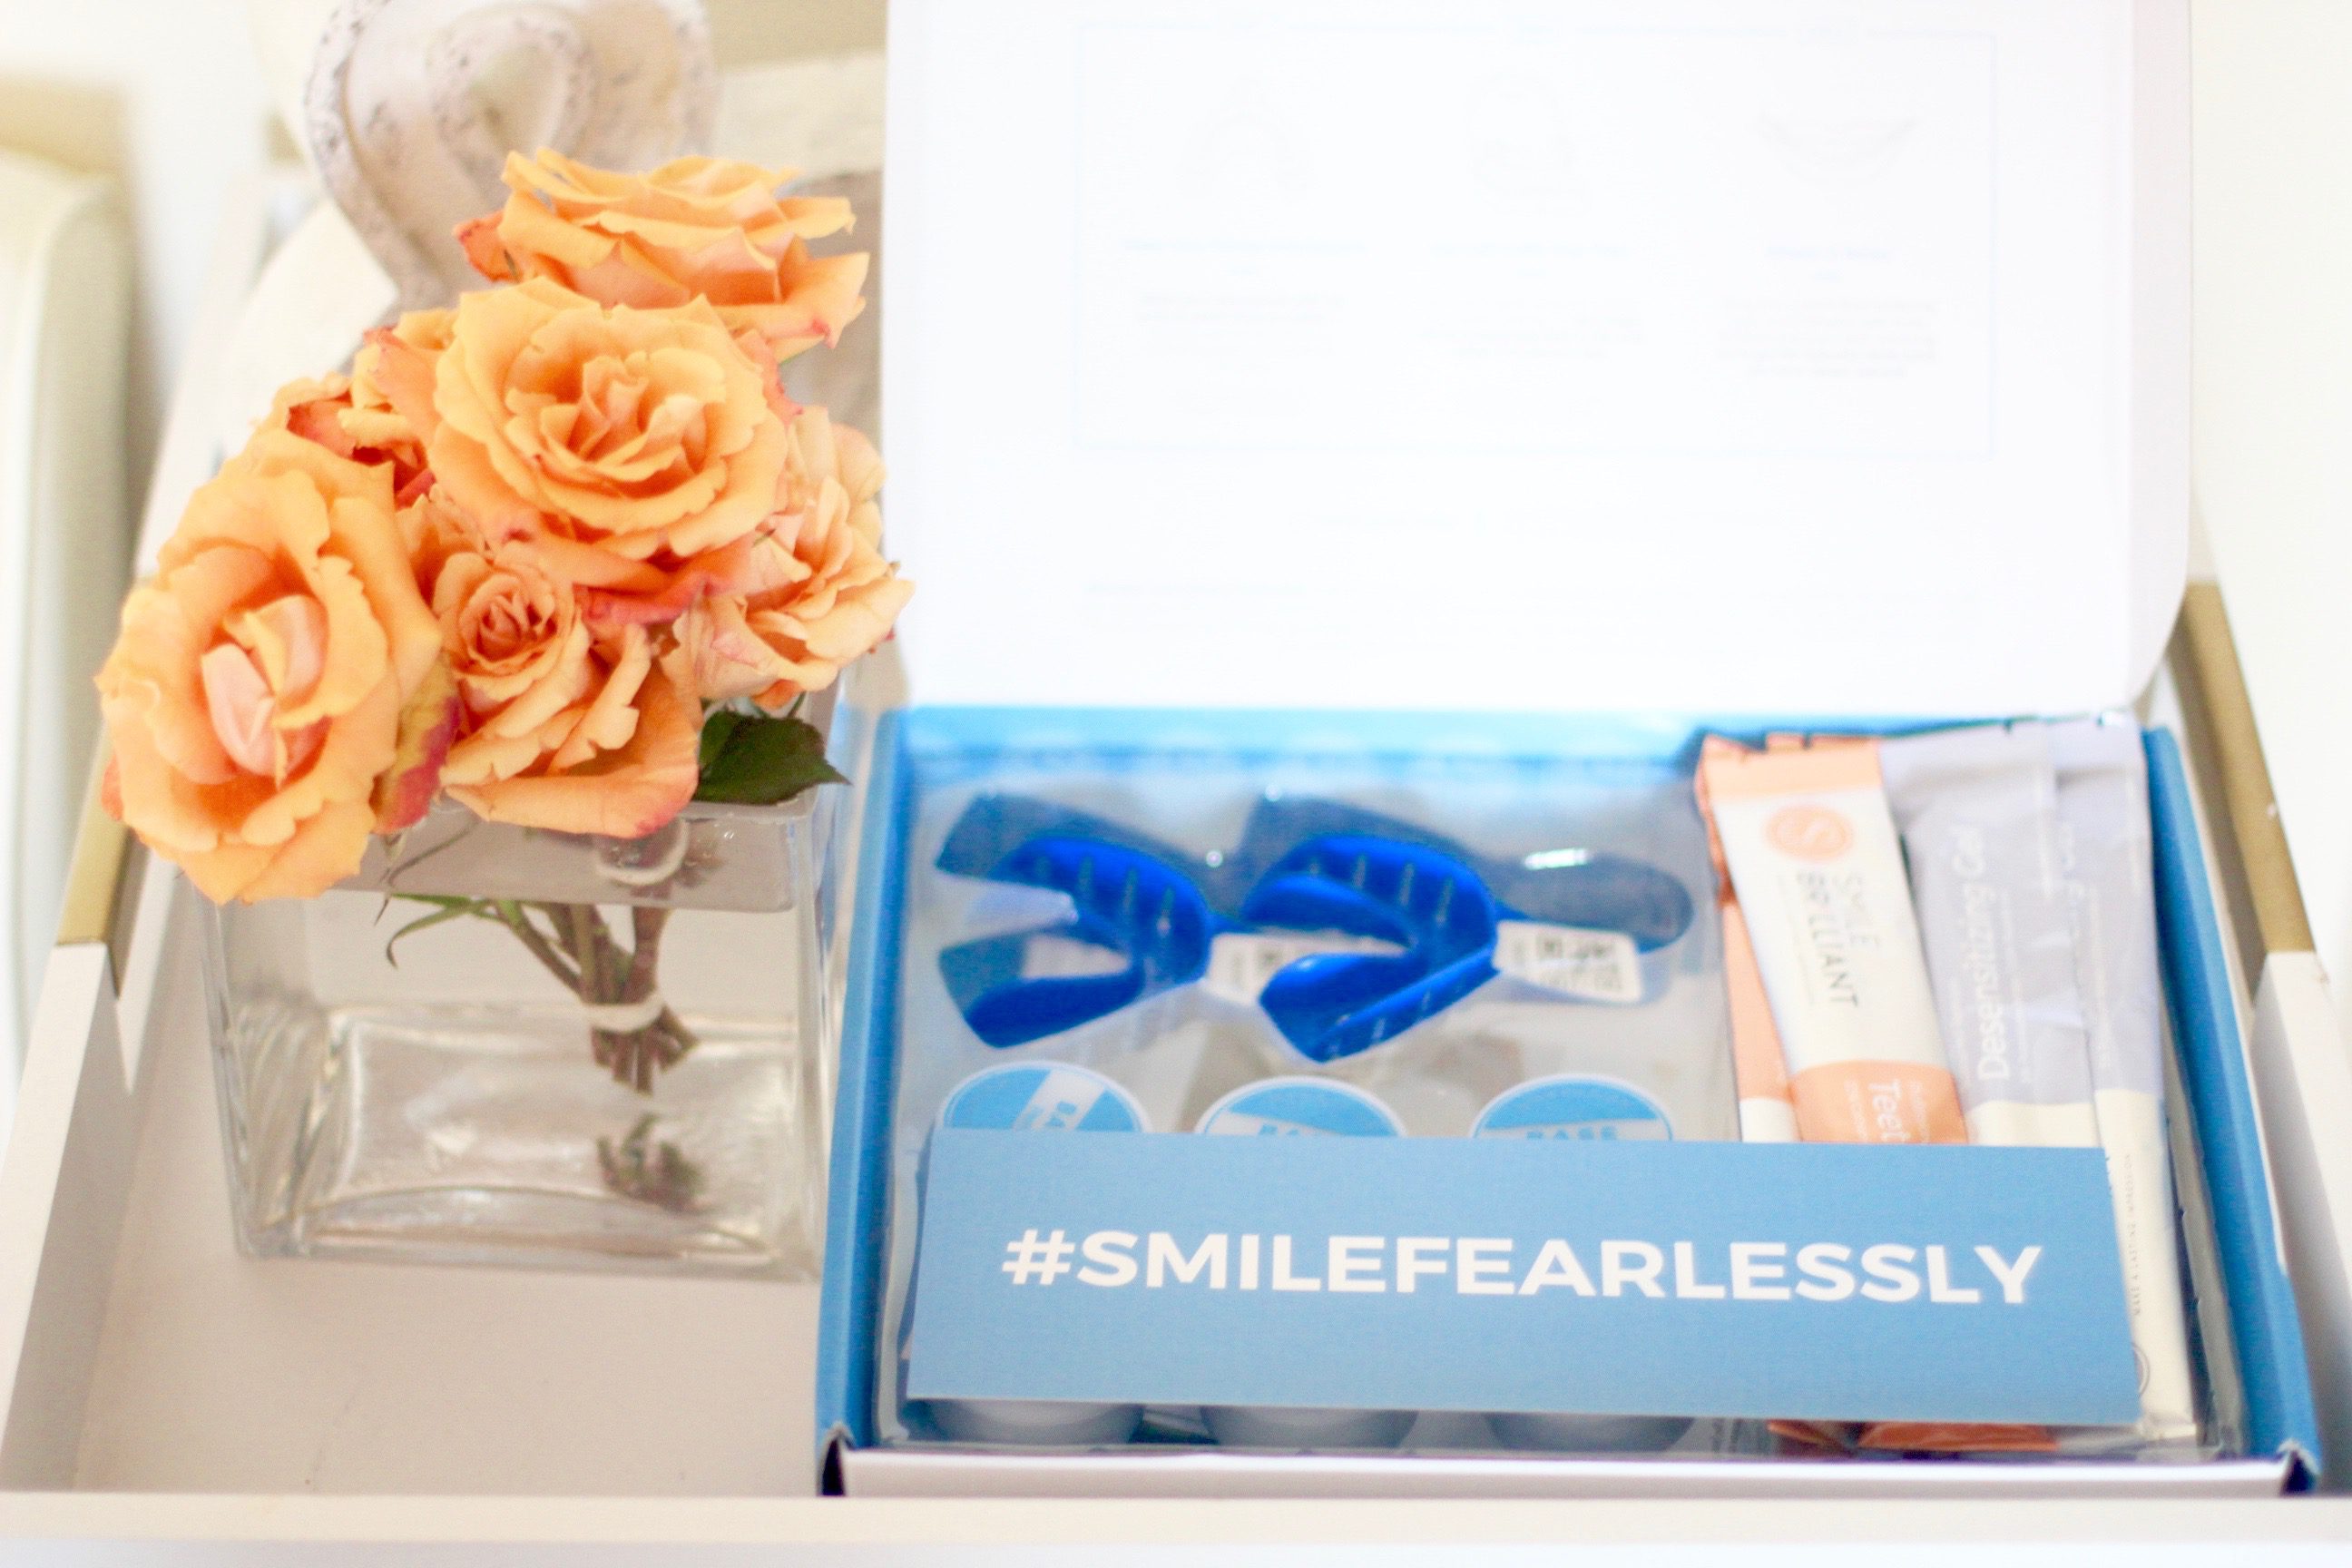 home teeth whitening kit, how to whiten your teeth at home, missyonmadison, melissa tierney, teeth whitening, smile brilliant, bright smile, dentist, teeth whitening kit, pearly whites, teeth whitening system, giveaway, contest, la blogger, beauty blogger, smile brilliant reviews,